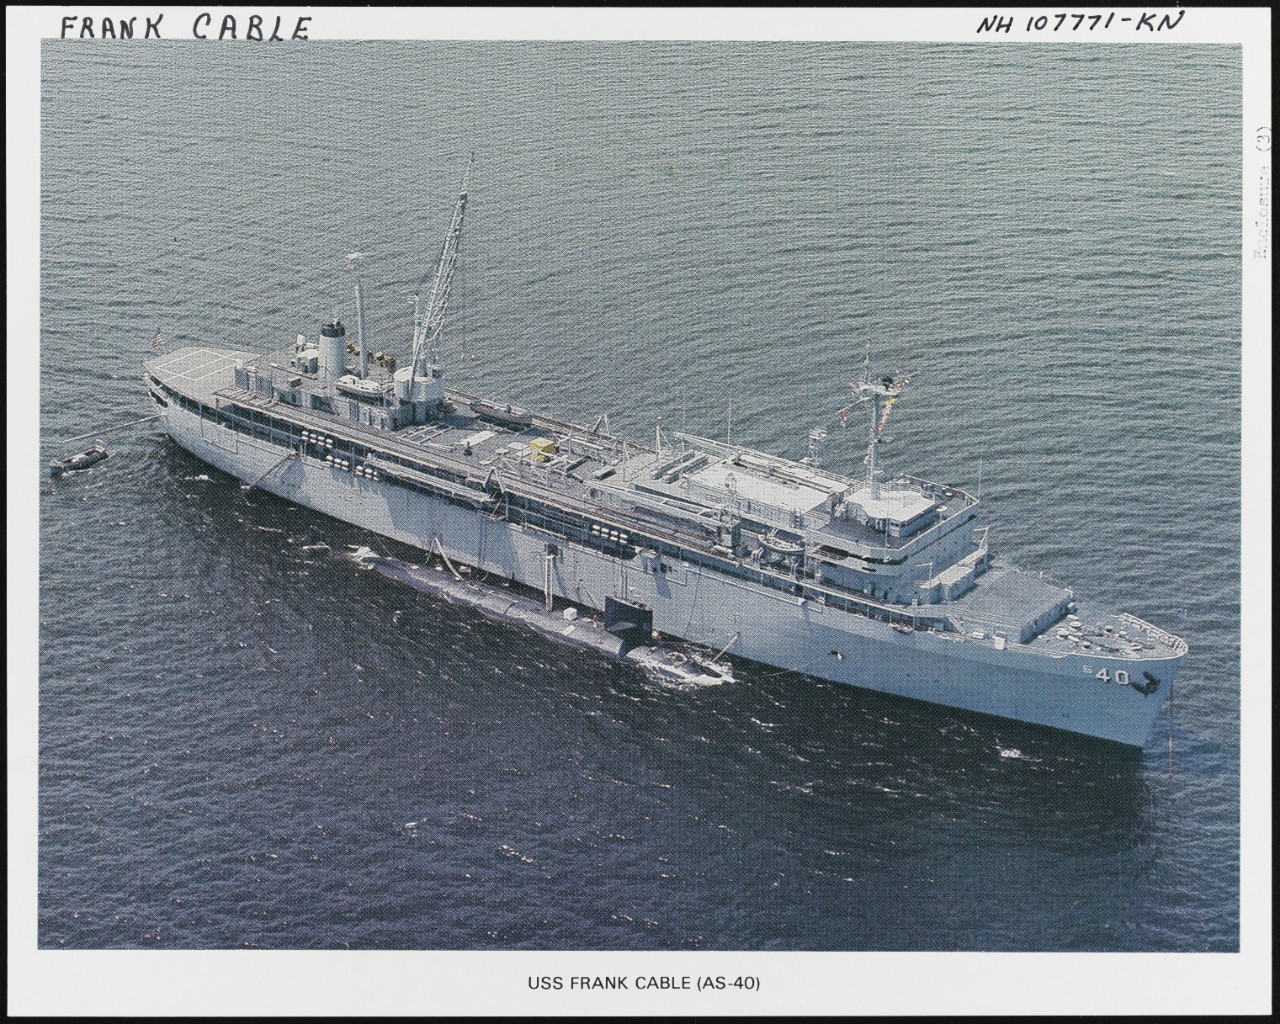 Photo #: NH 107771-KN USS Frank Cable